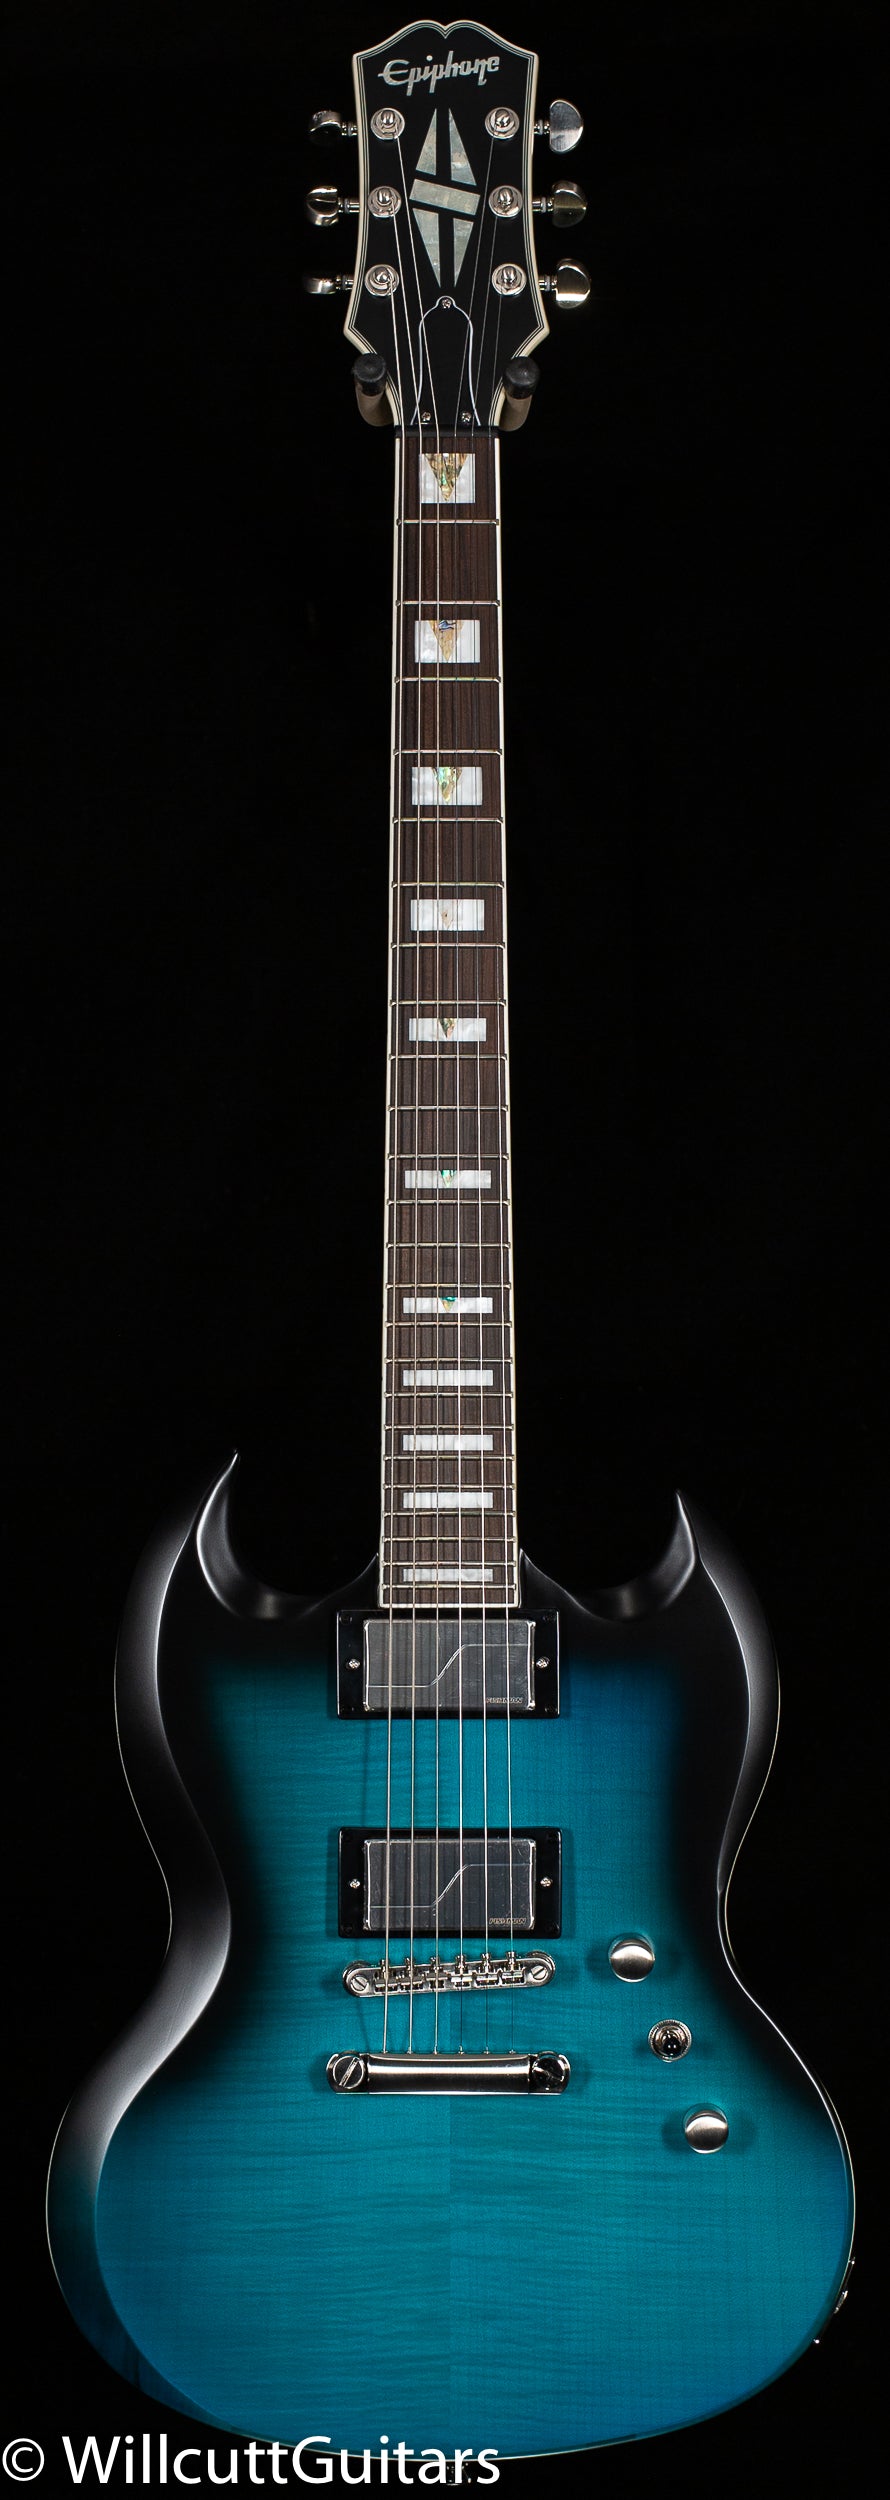 Epiphone SG Prophecy Blue Tiger Aged Gloss (959) - Willcutt Guitars